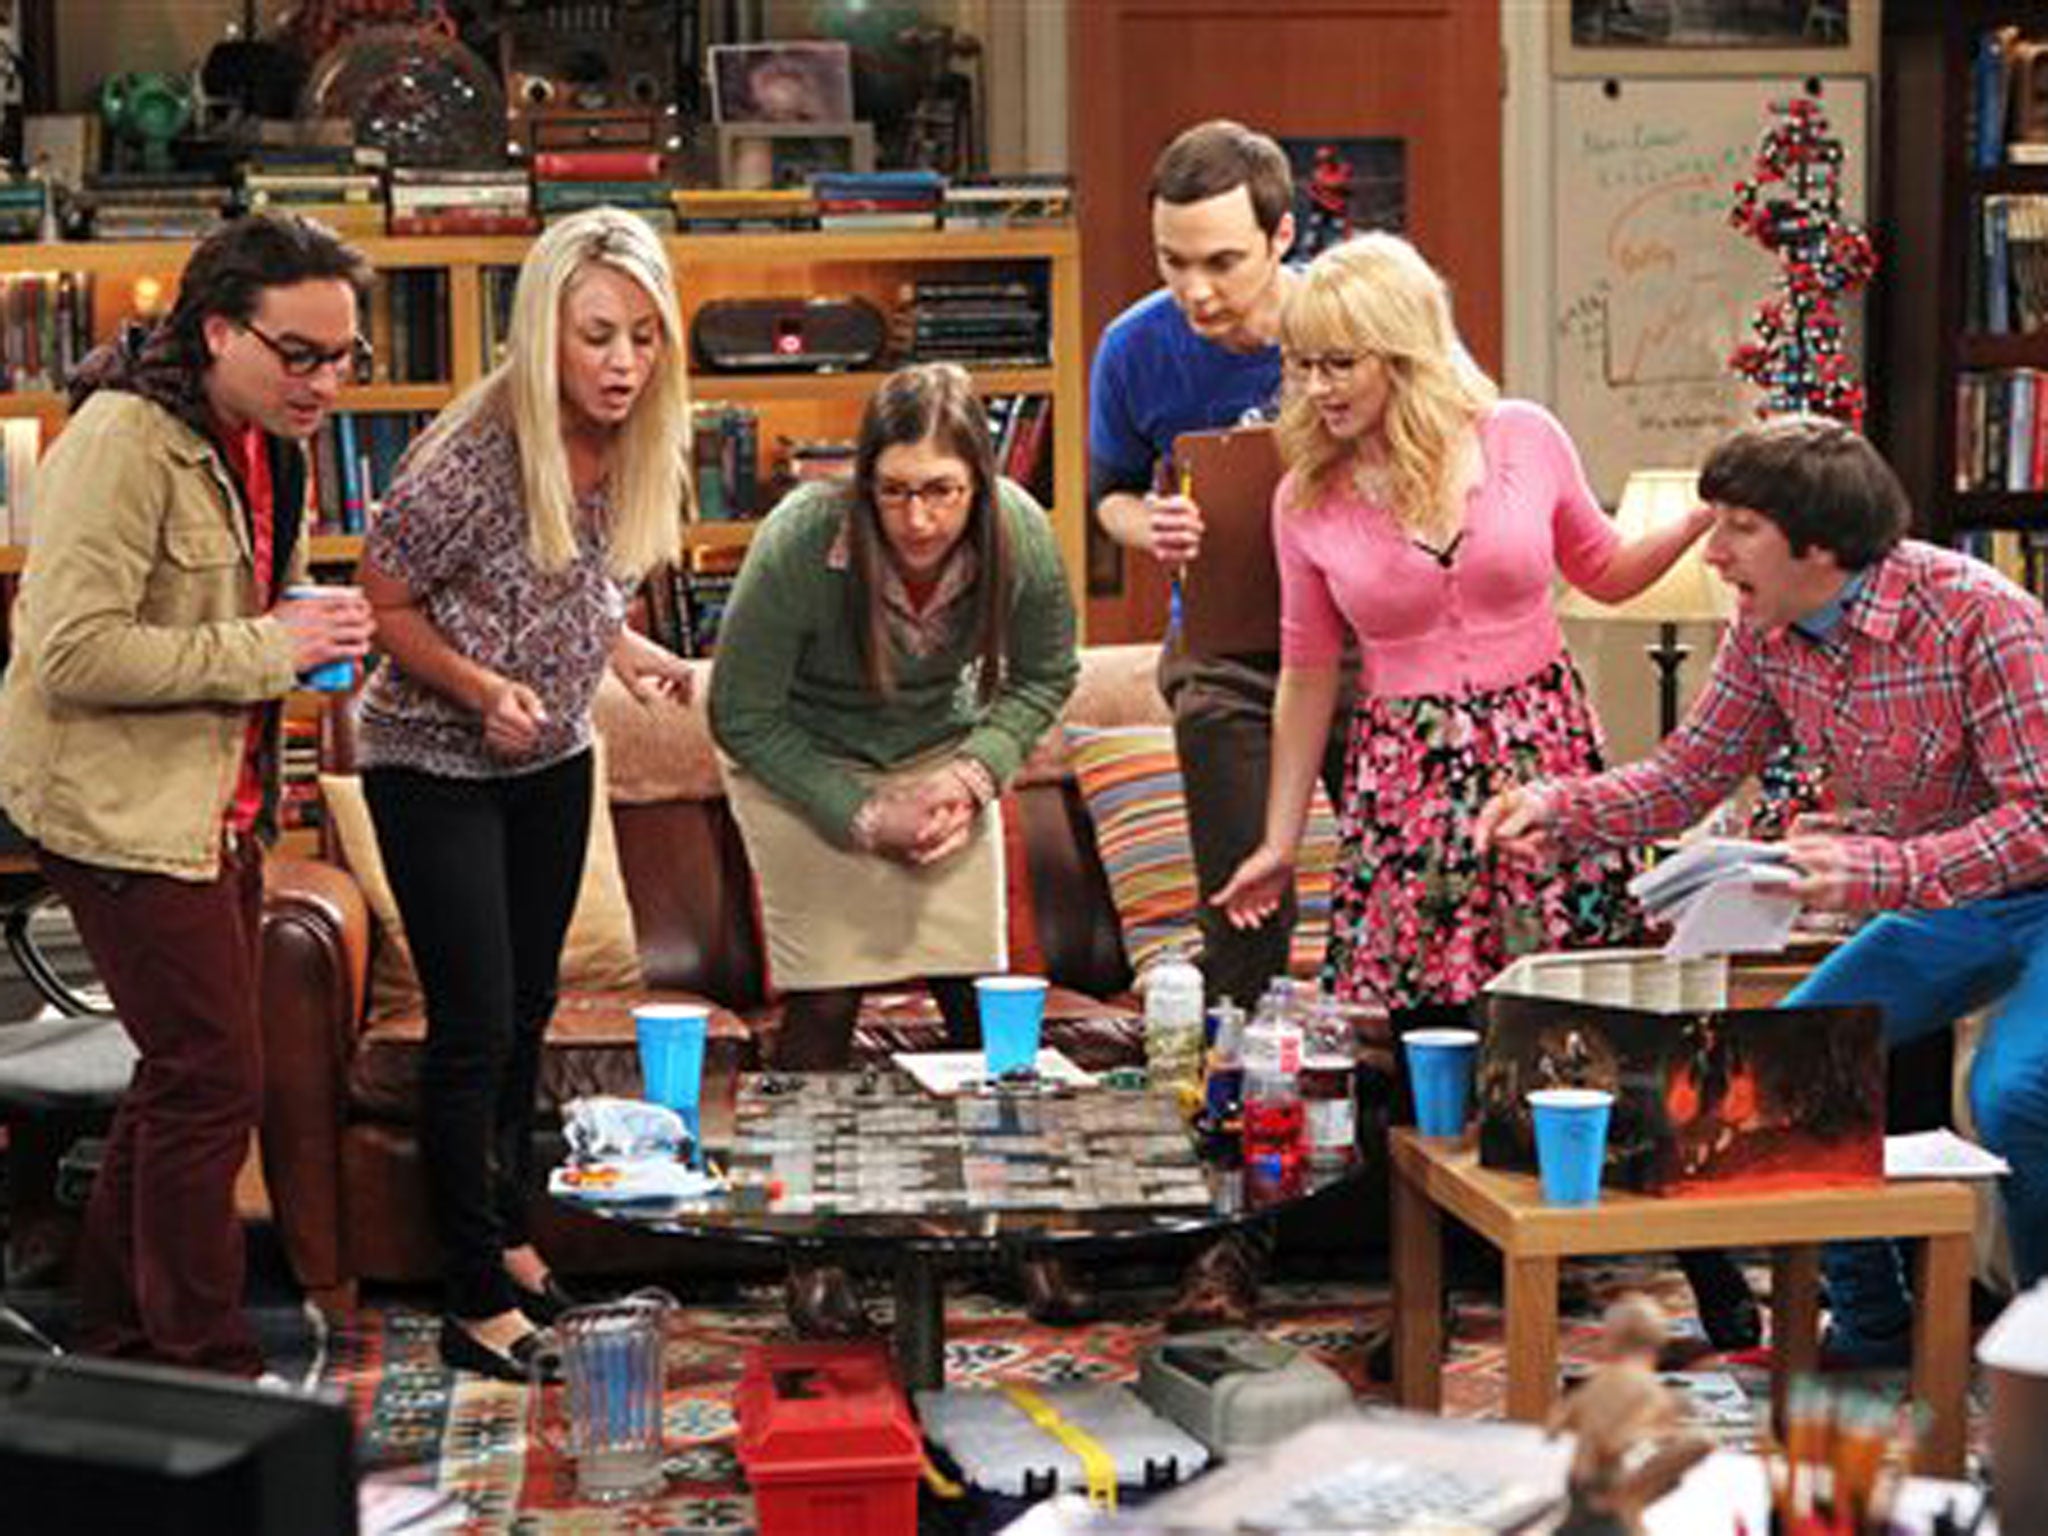 The cast of The Big Bang Theory in a still from the show